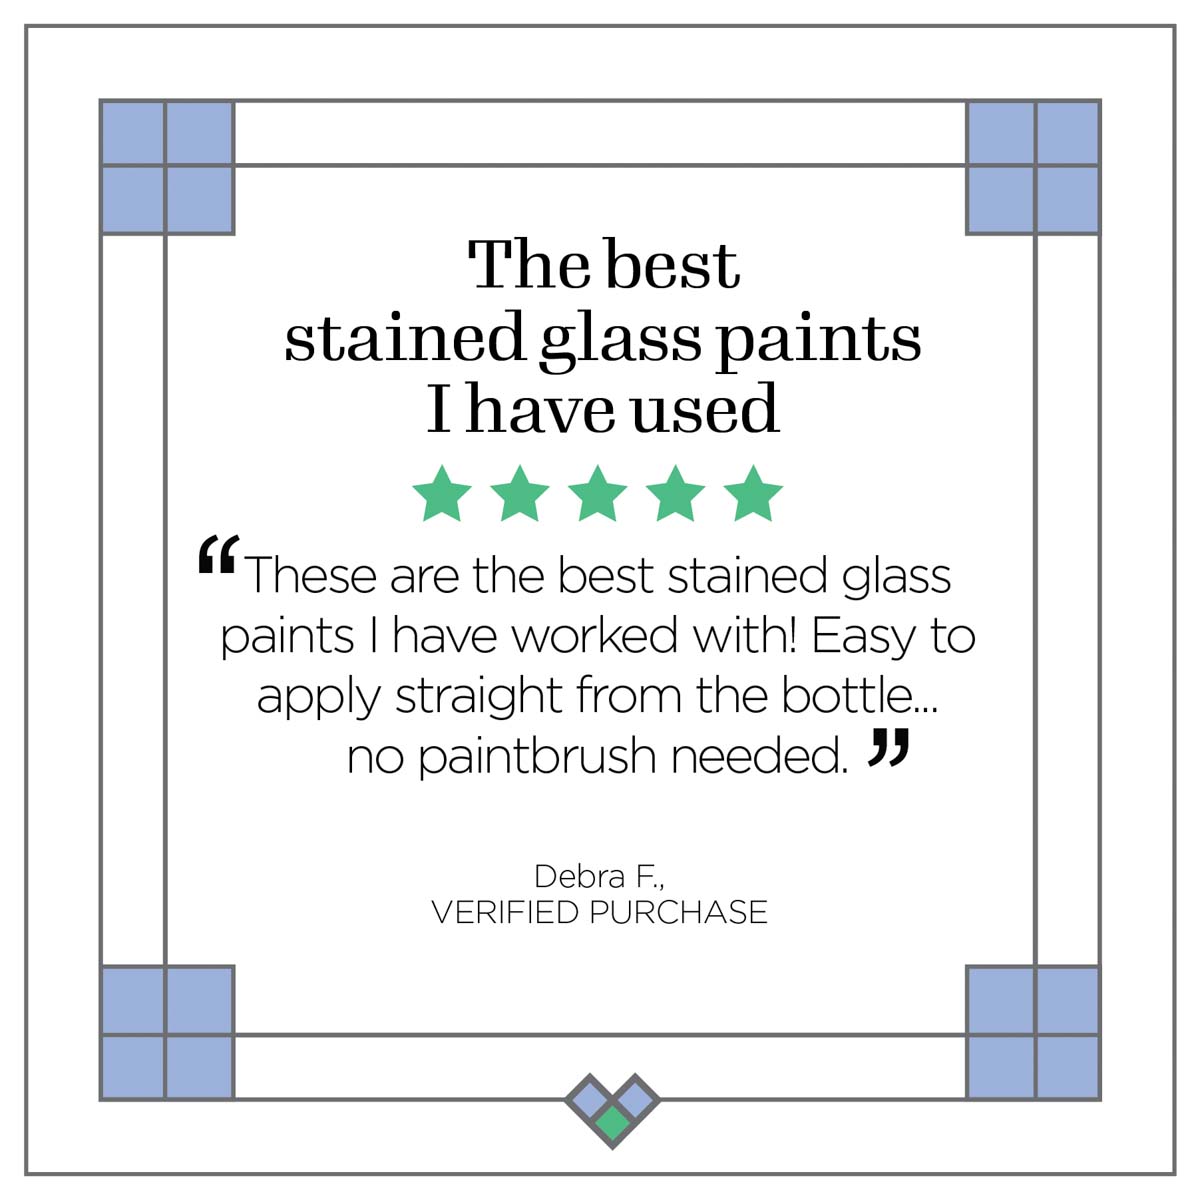 Gallery Glass ® Stained Glass Effect Paint - White Pearl, 2 oz. - 19715